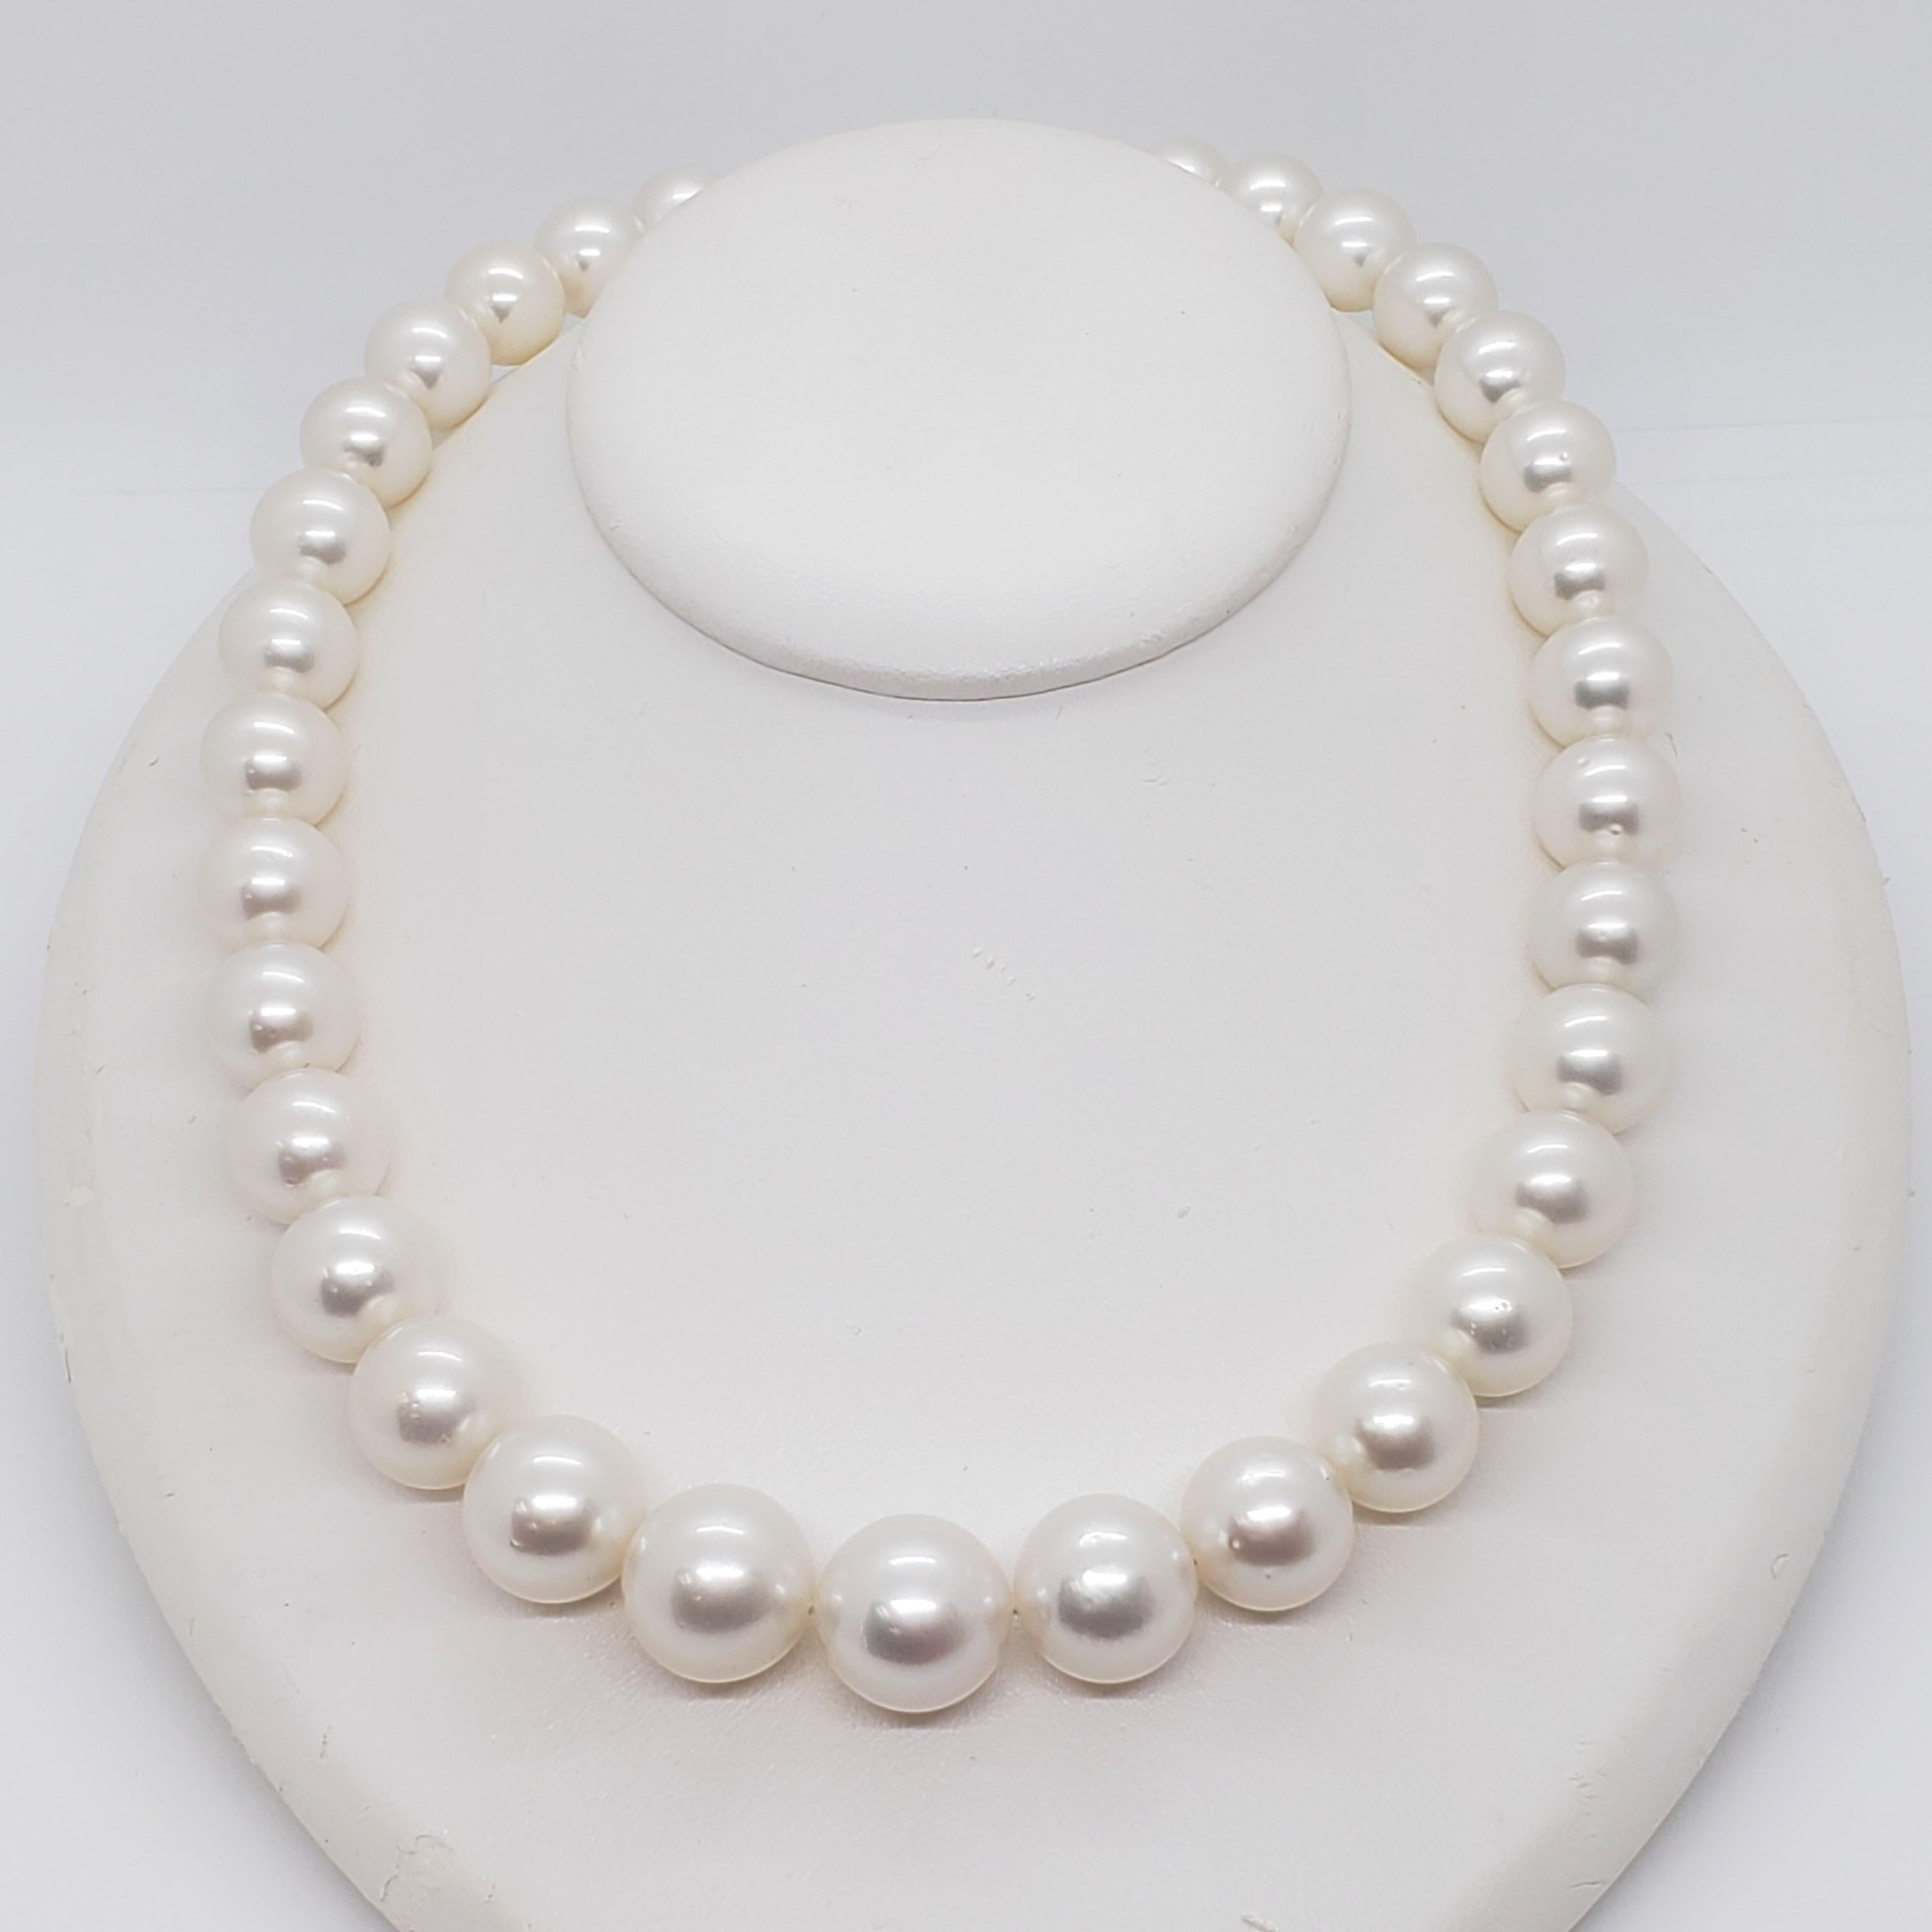 This unfinished strand showcases 33 South Sea white round pearls that are 12 - 15.5 mm each.  Any clasp can be fastened from a simple everyday one to a more elaborate one.  Beautiful pearls, smooth, lovely color.